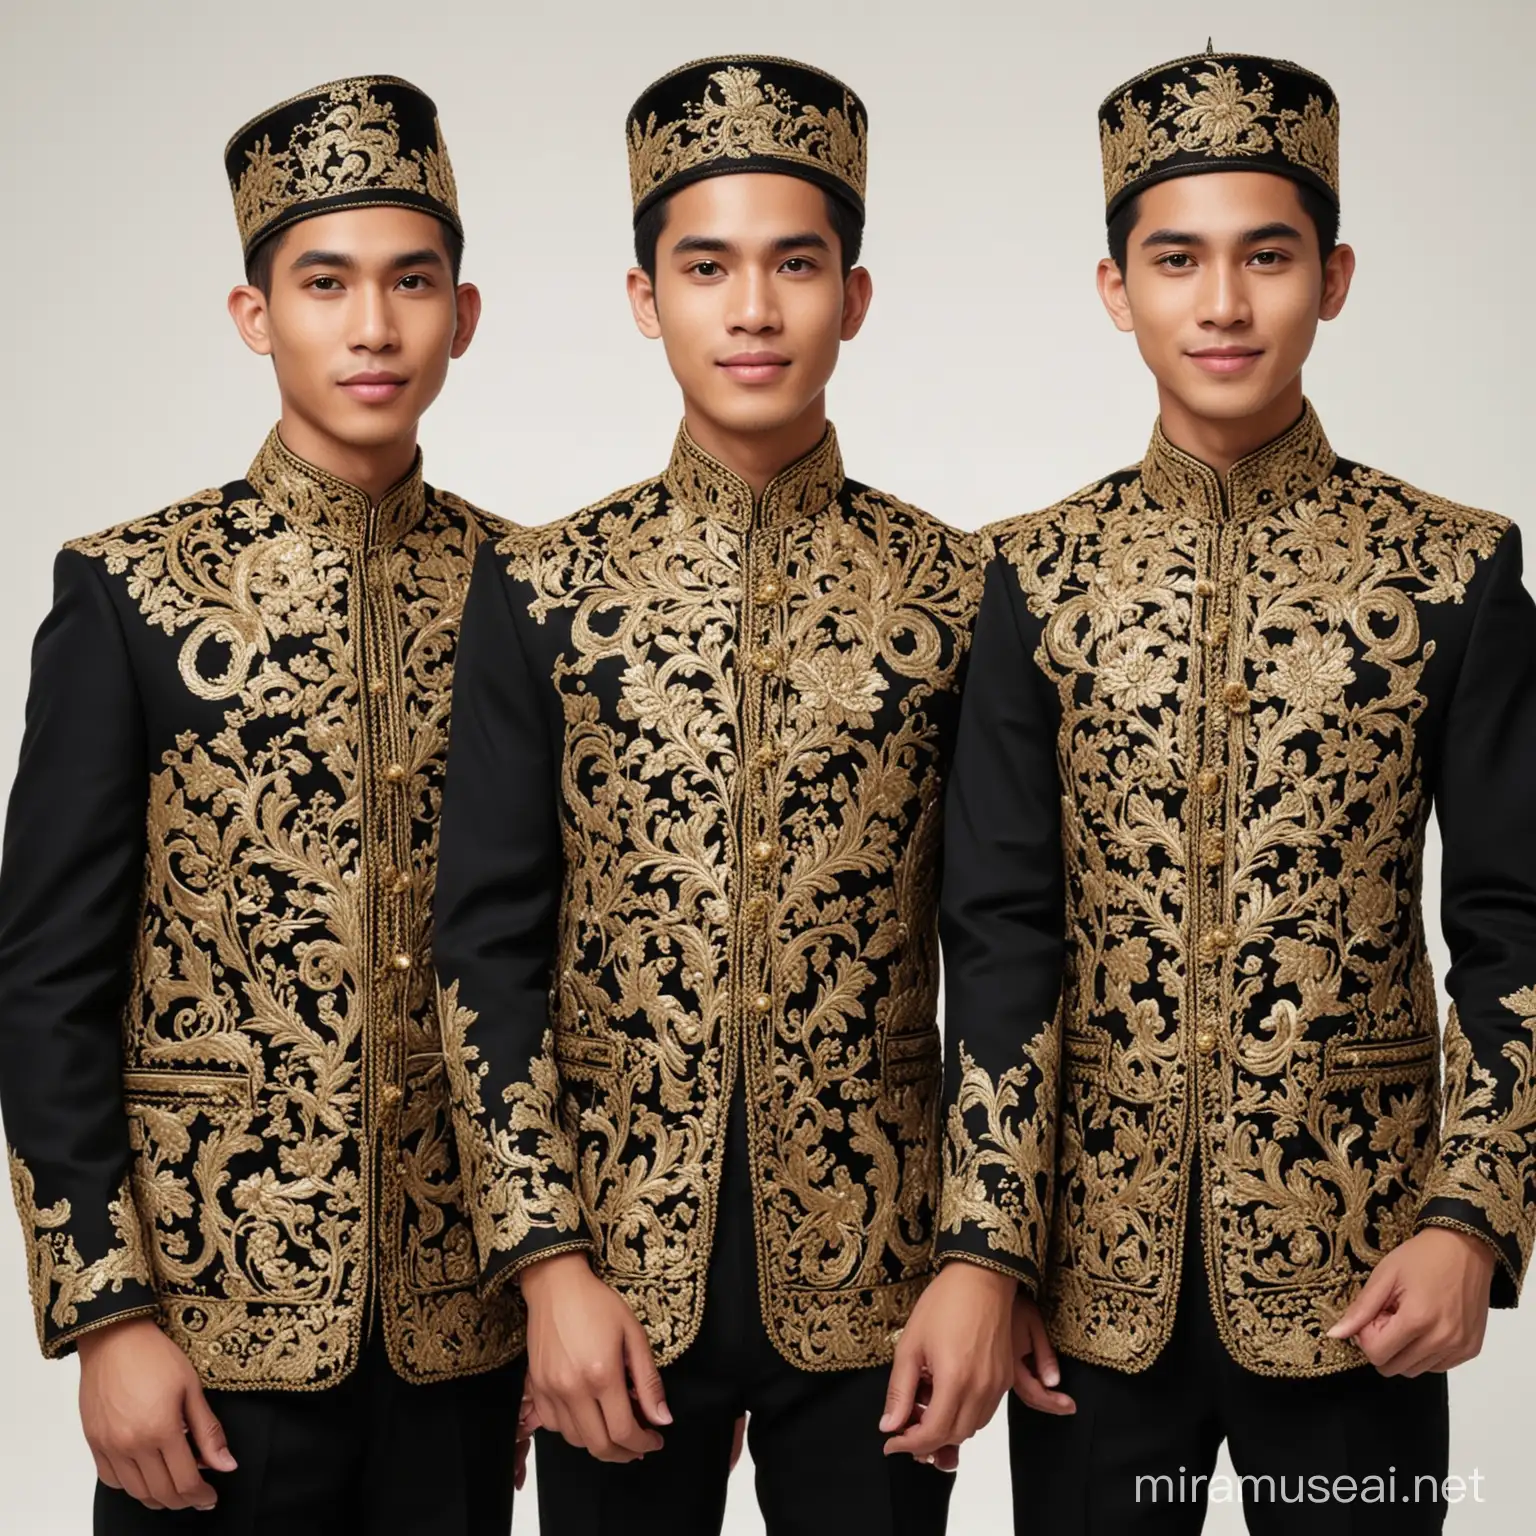 Authentic Indonesian Men in Black Suits with Gold Embroidery on White Studio Background